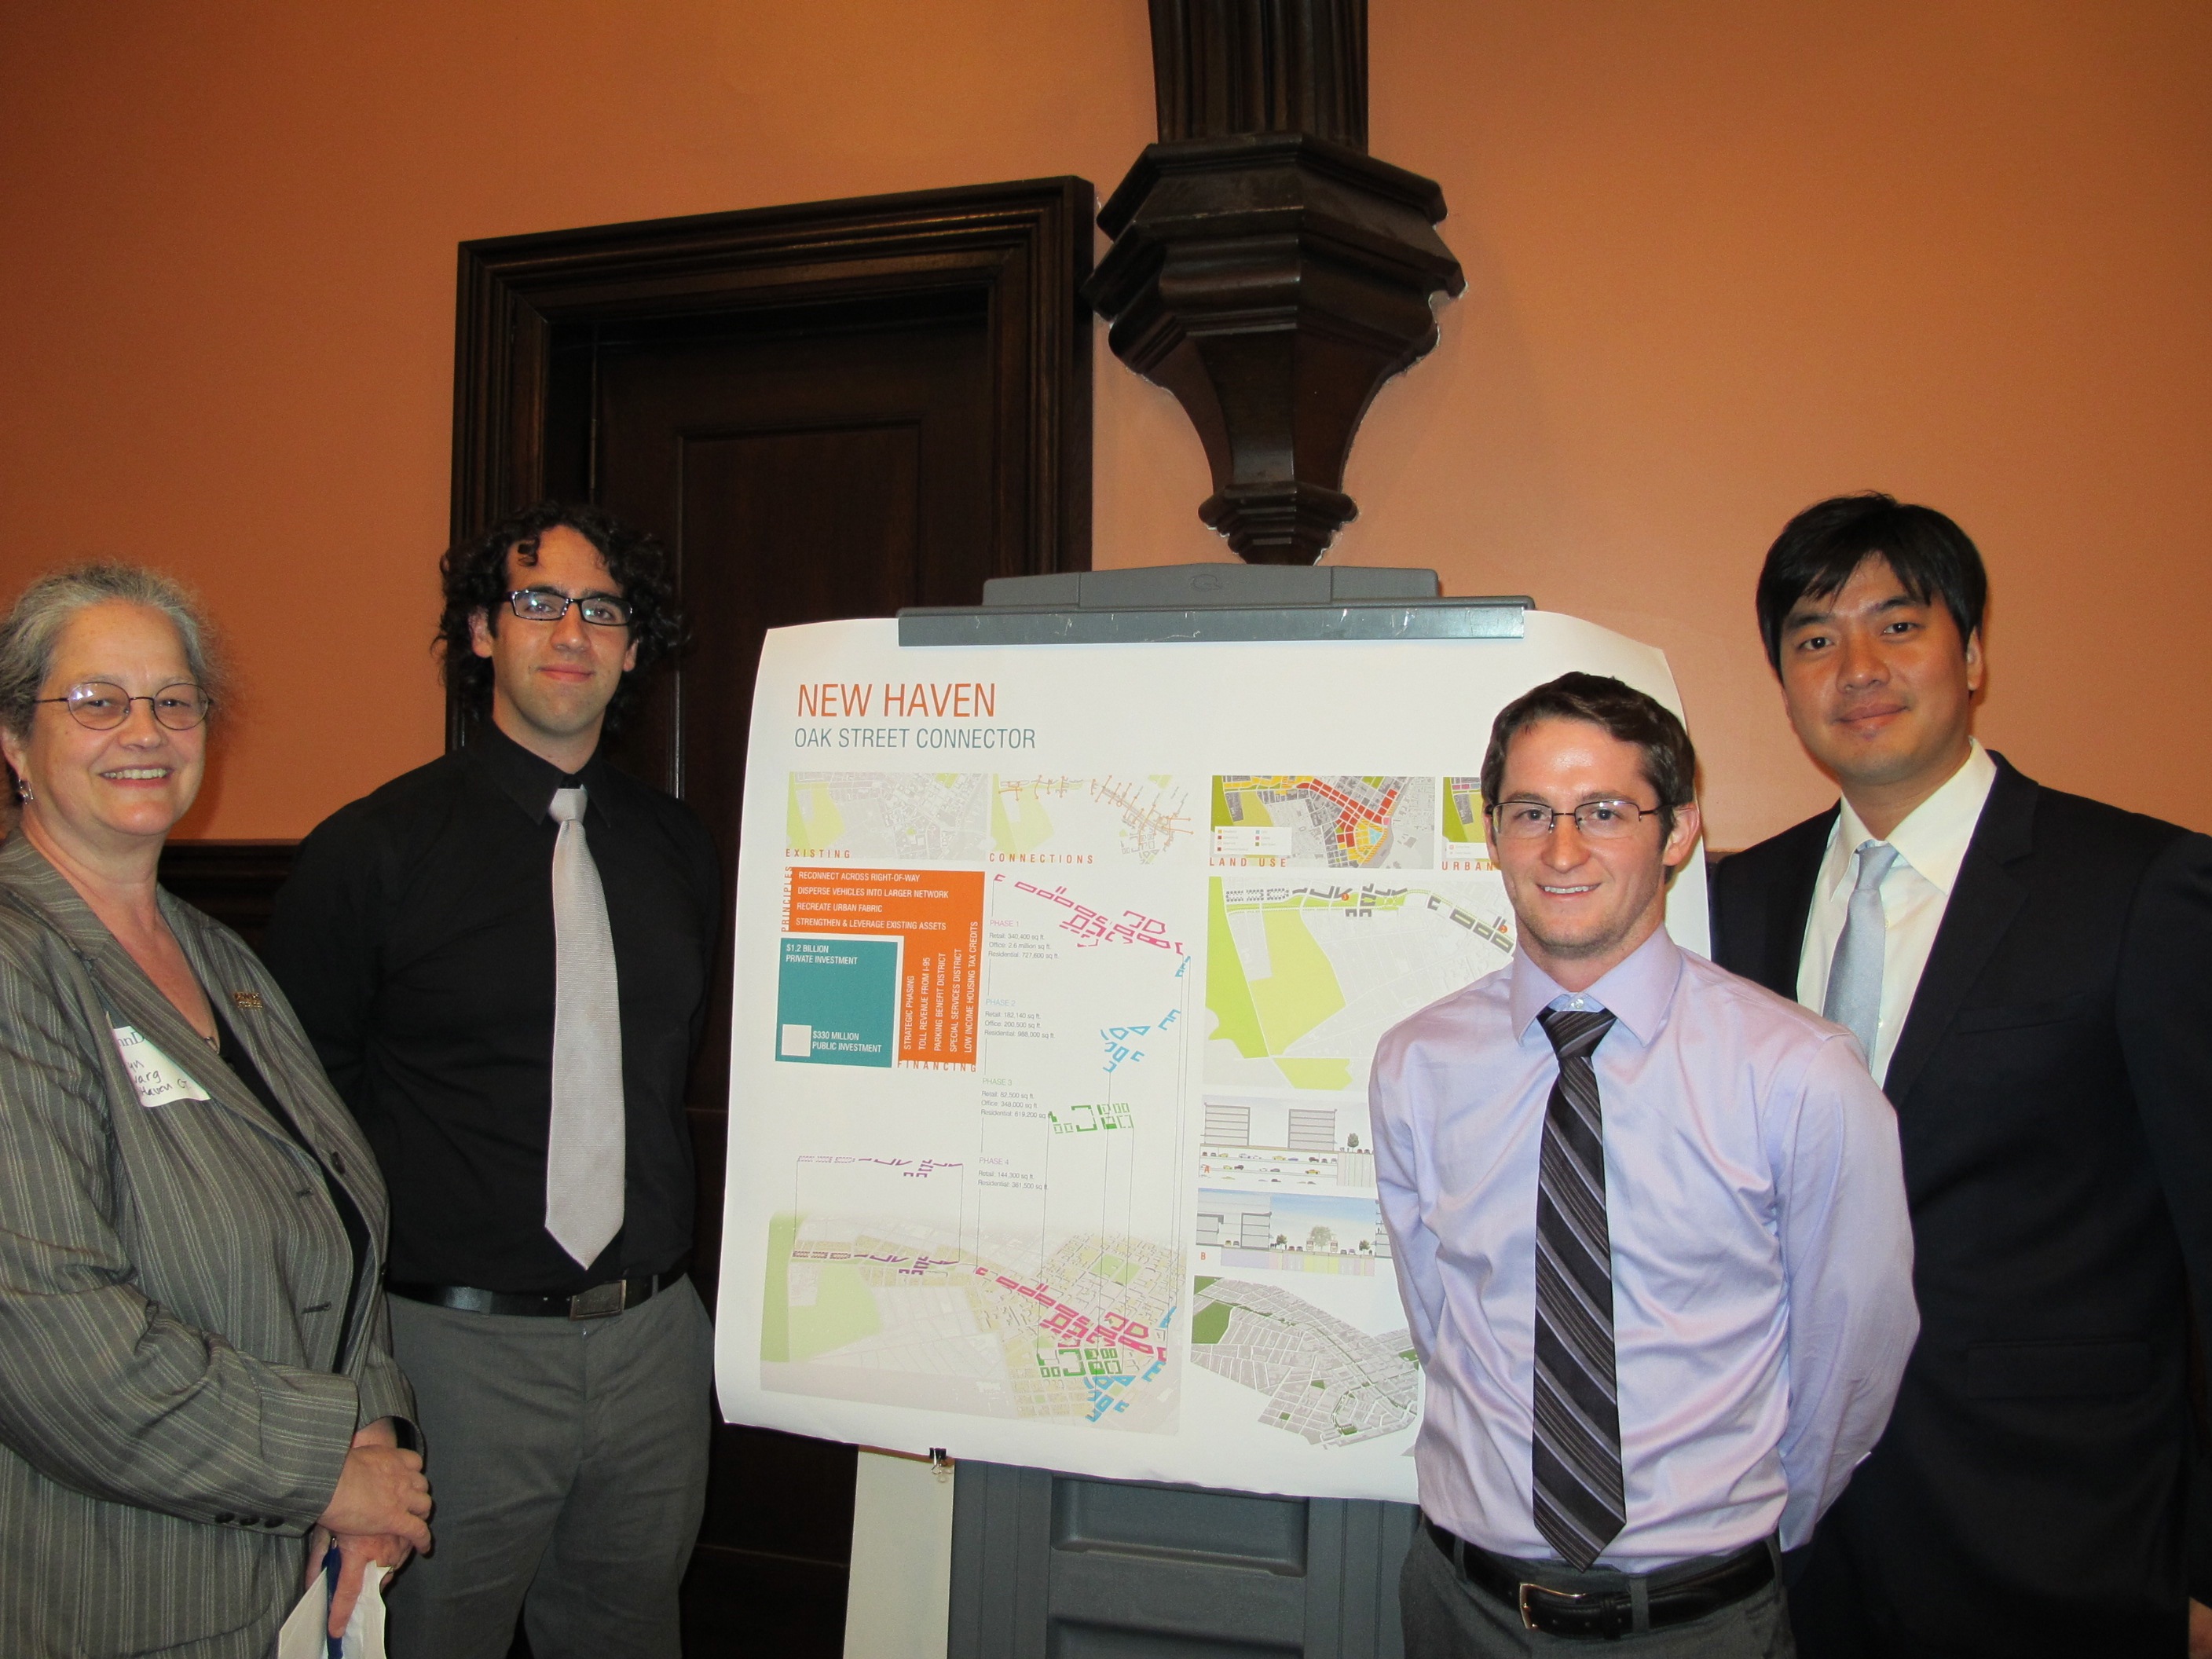 New Haven team: City planning director Karyn Gilvargn and students Jordan Block, Mike Ruane and Ho Sung Park